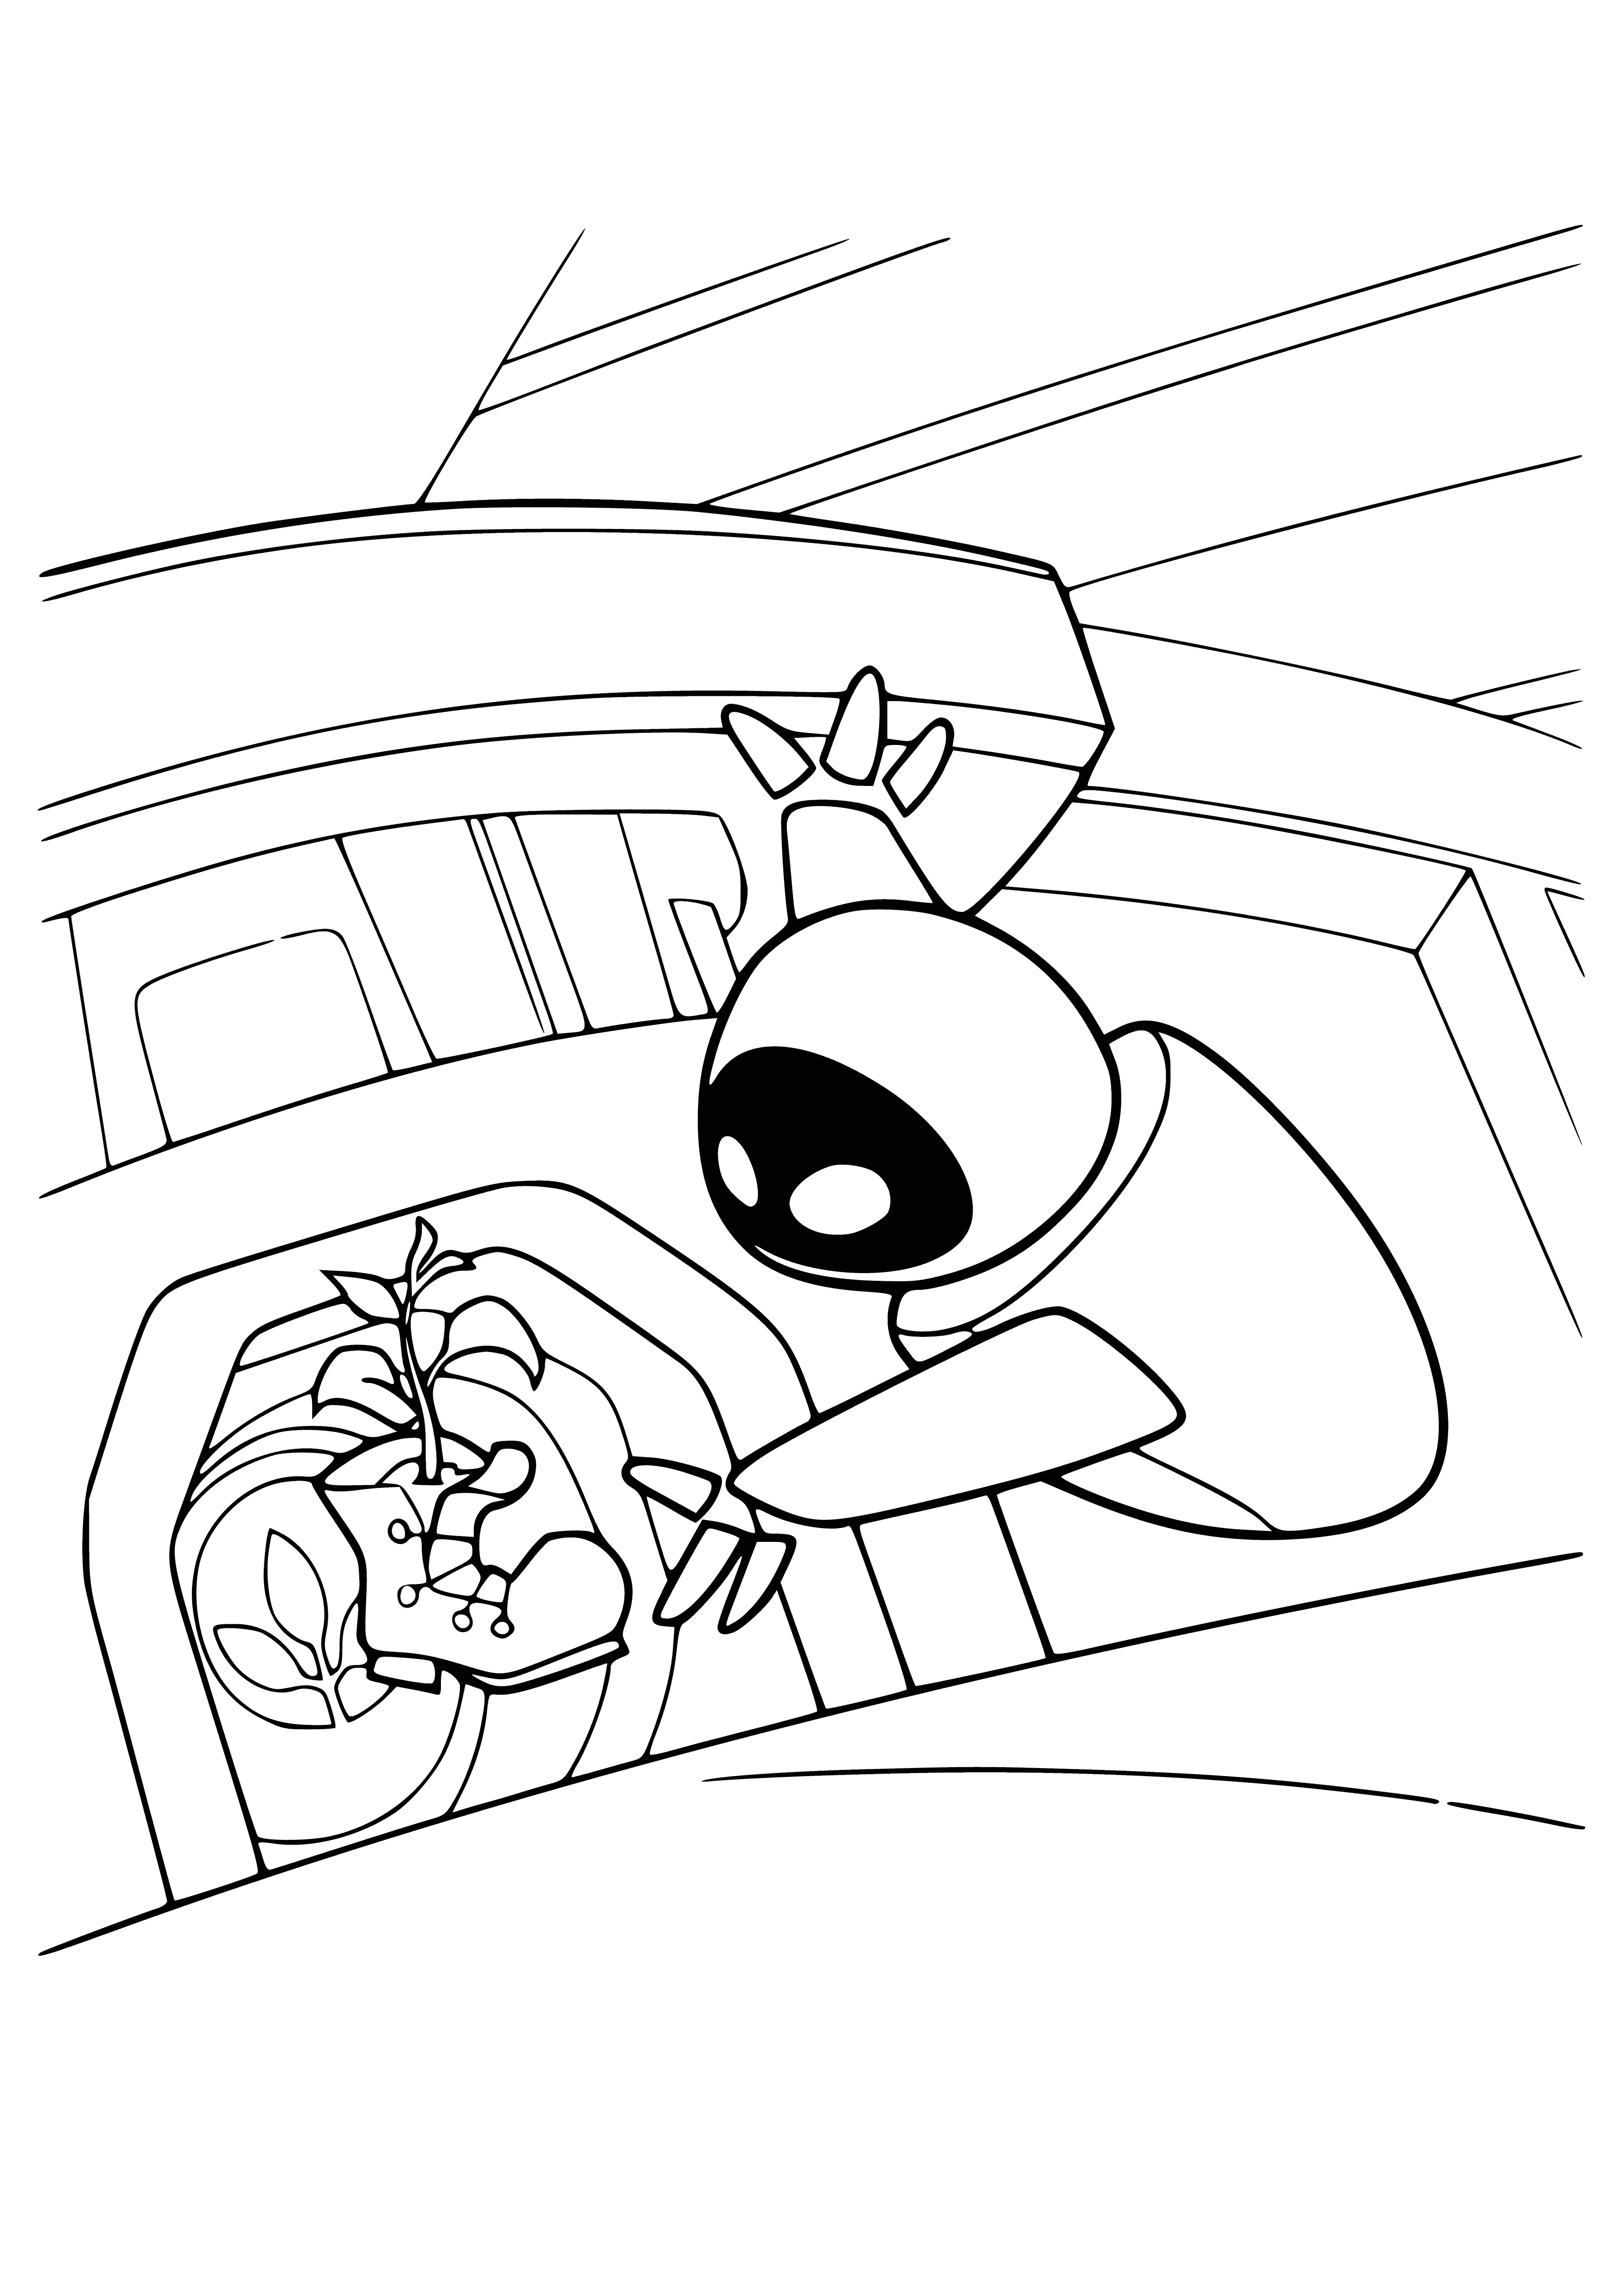 coloring page: Robot Eve holds a green plant, with a stem and leaves.